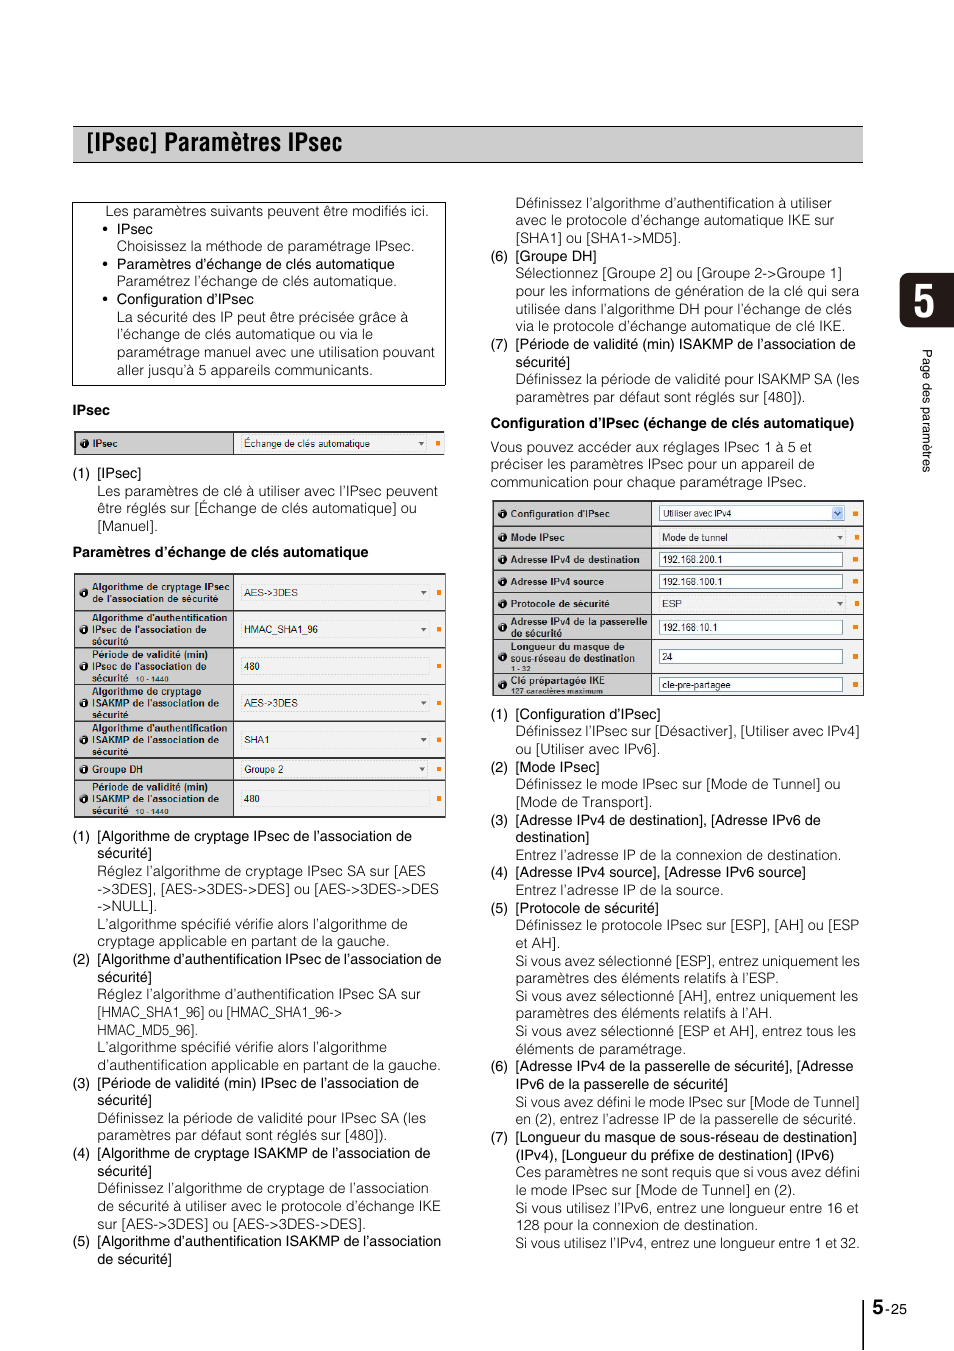 Ipsec] paramètres ipsec, Ipsec] paramètres ipsec -25, Paramètres ipsec (p. 5-25) | Canon VB-M40 Manuel d'utilisation | Page 69 / 159